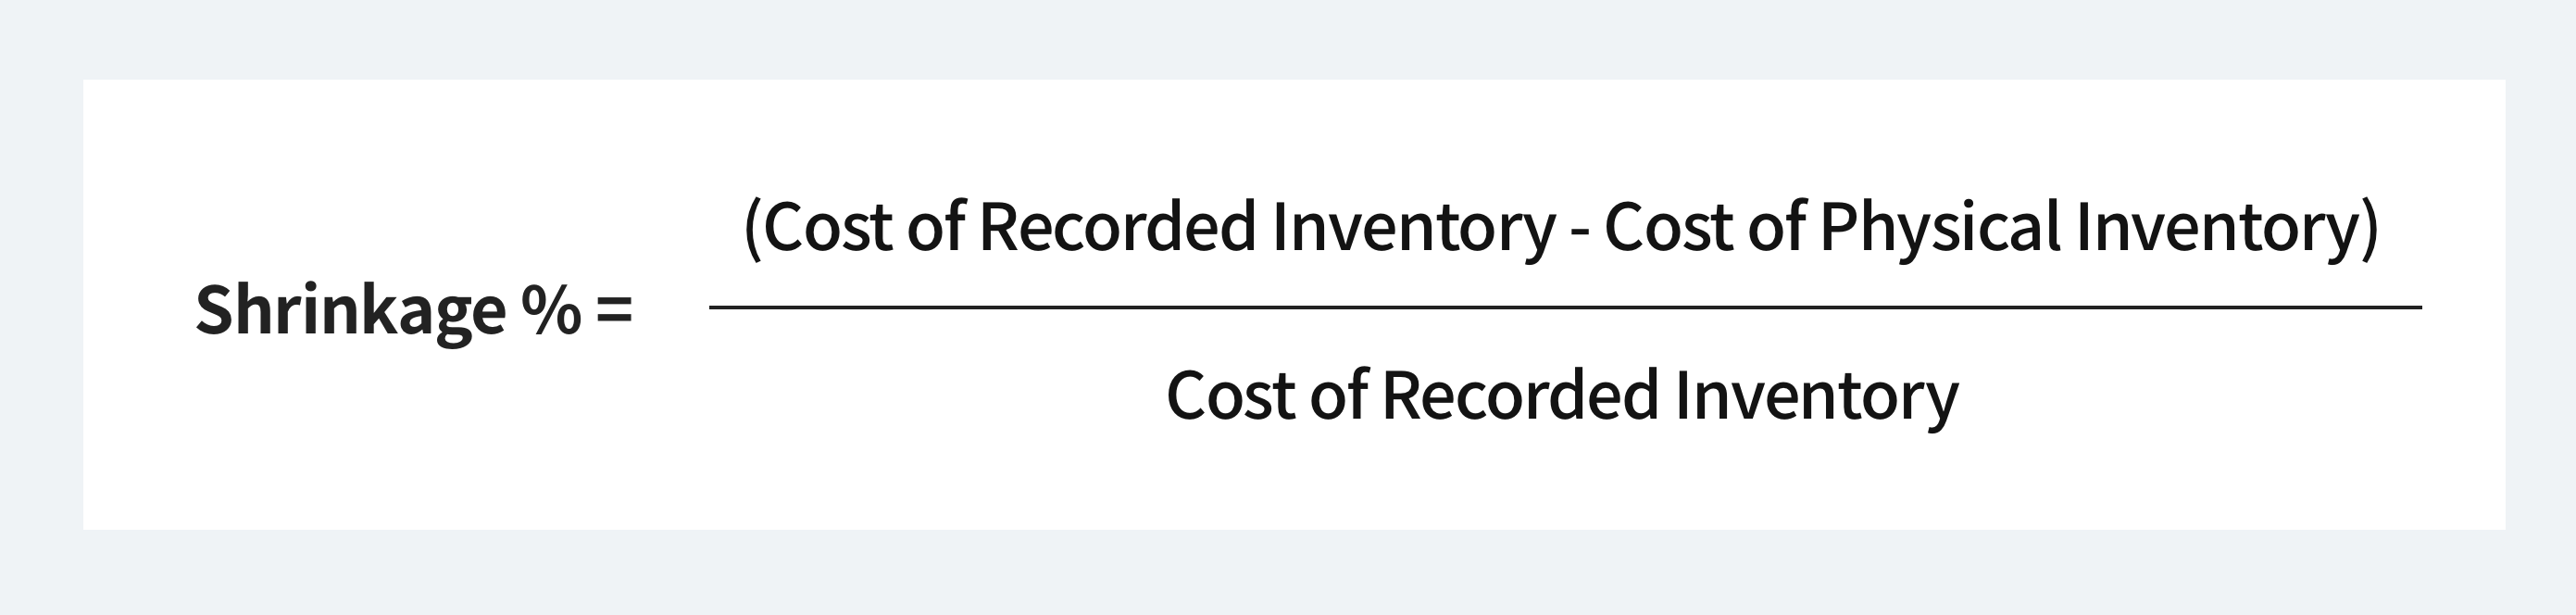 Shrinkage = (Cost of Recorded Inventory - Cost of Physical Inventory) / Cost of Recorded Inventory